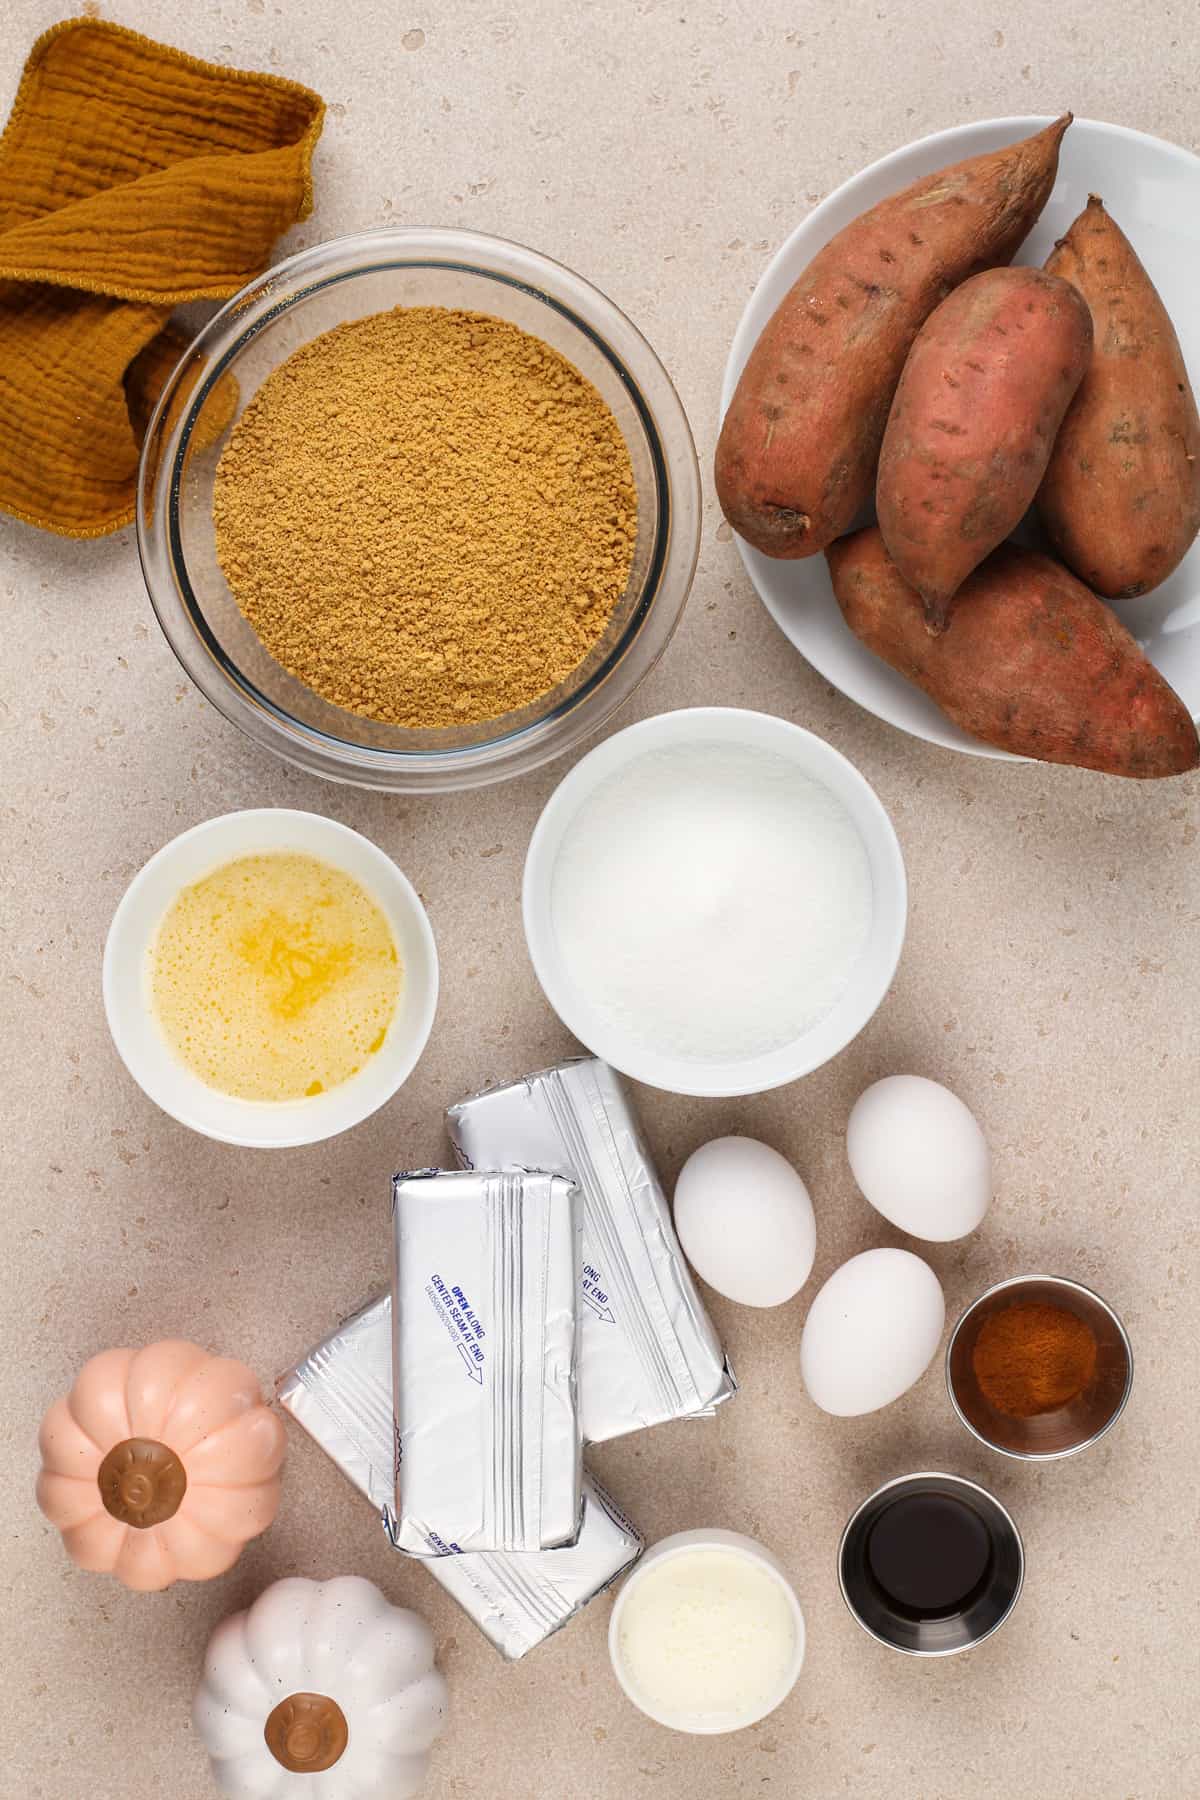 Ingredients for sweet potato cheesecake arranged on a beige countertop.